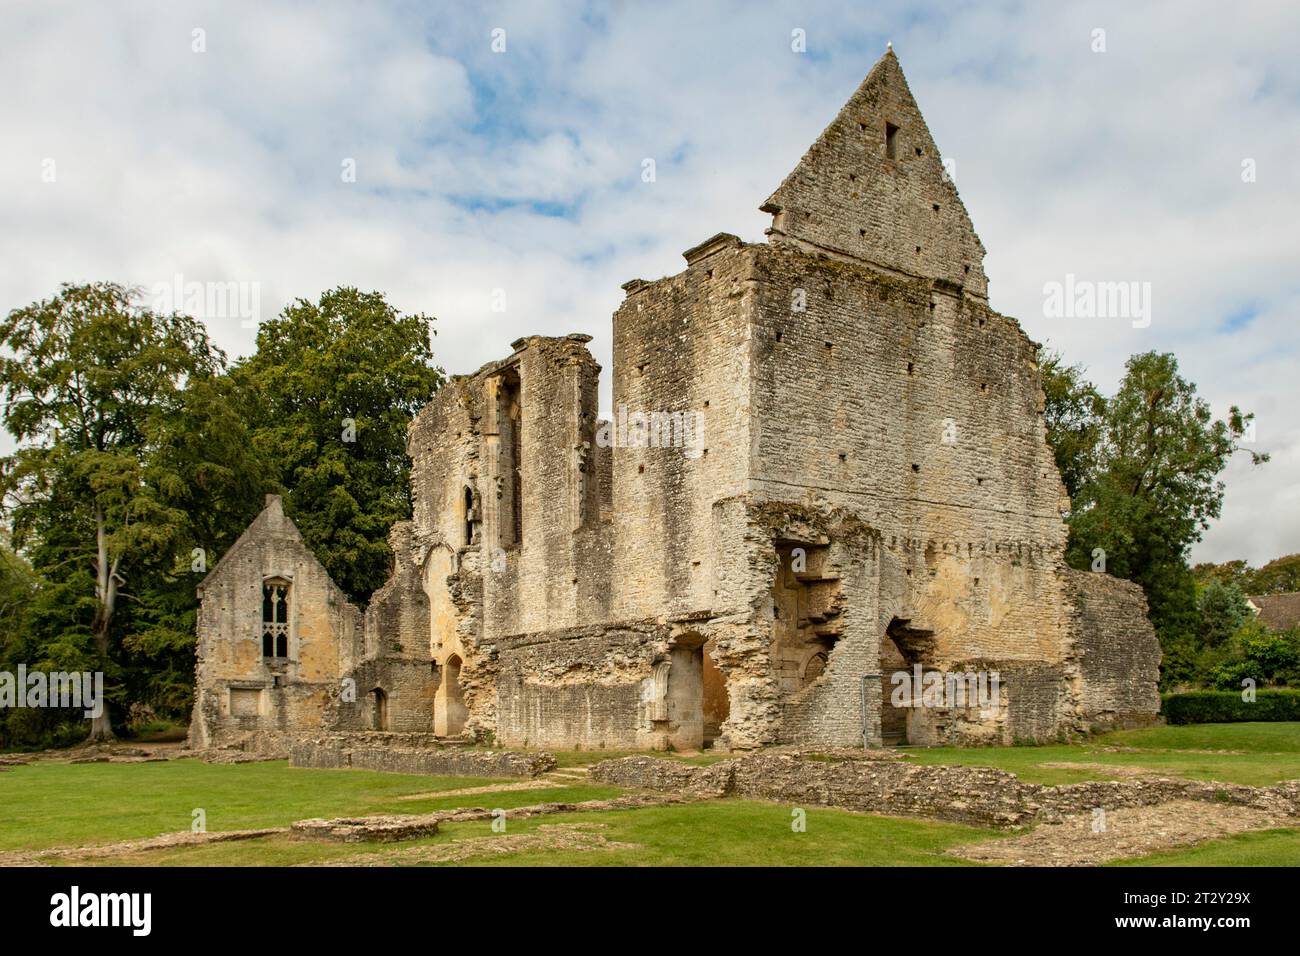 Ruines de Minster Lovell Hall, Minster Riding, Oxfordshire, Angleterre Banque D'Images